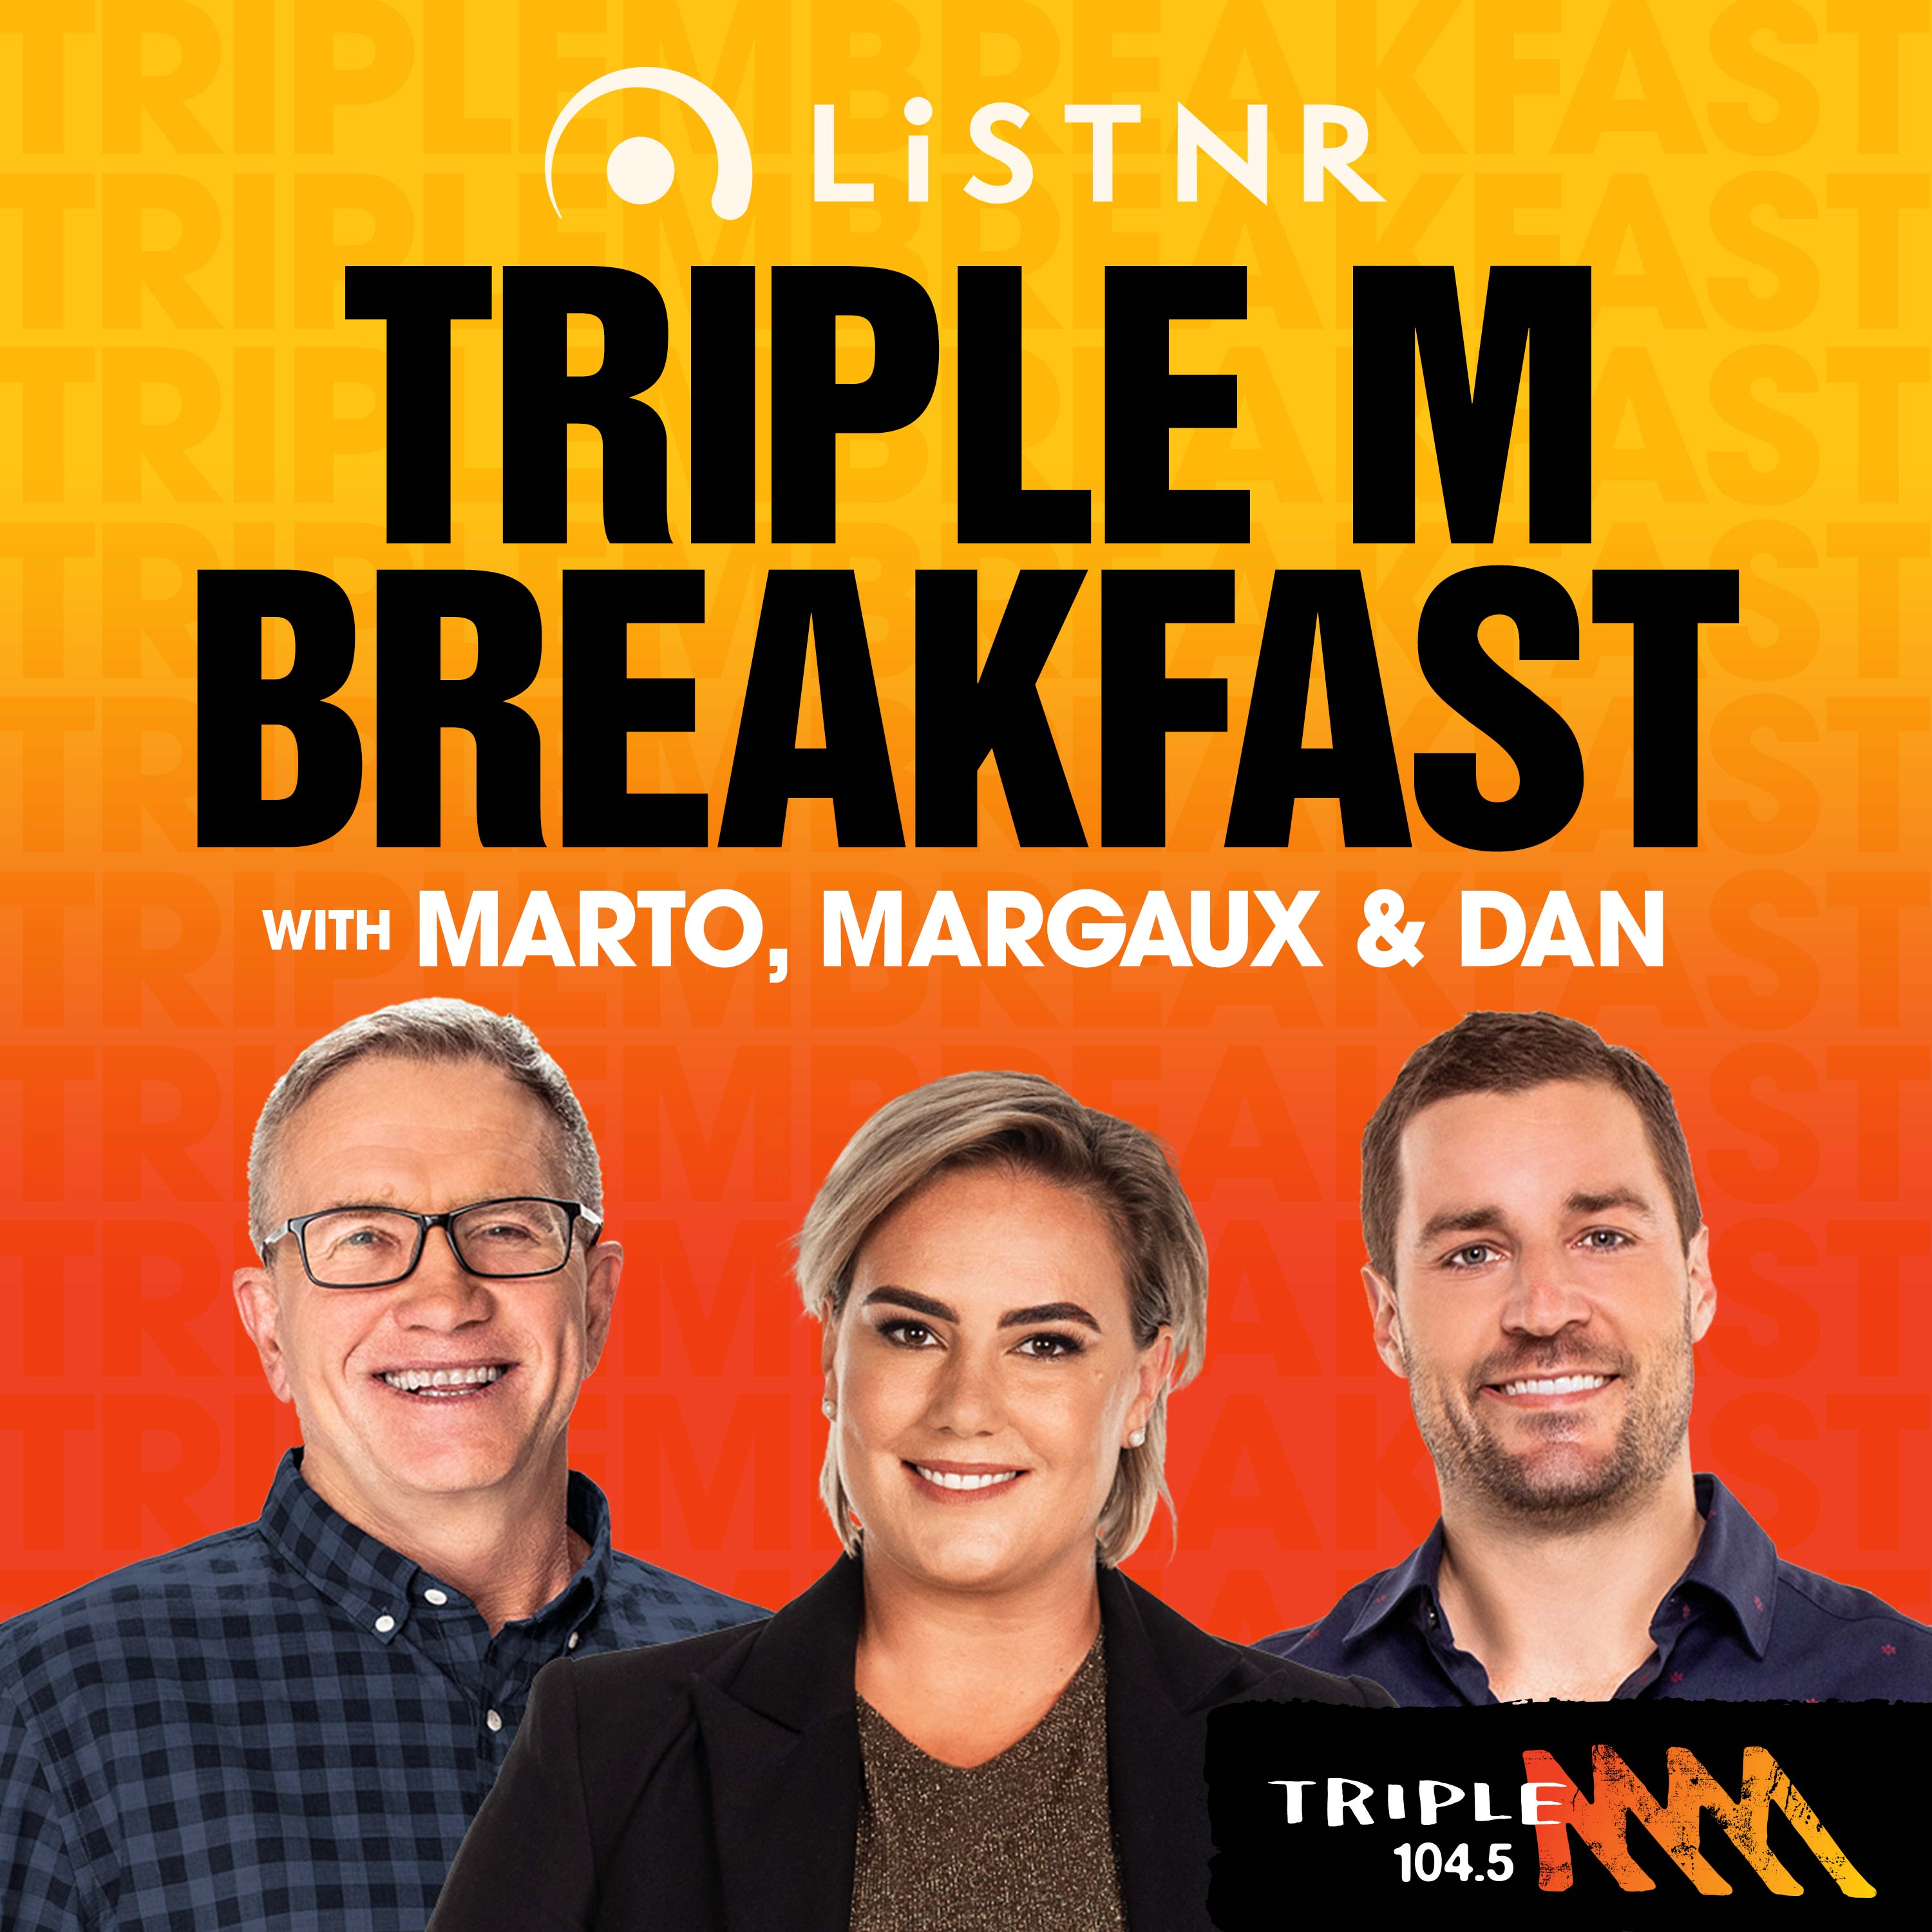 7:39 am - Triple M partners with the Kerr-ier Mail